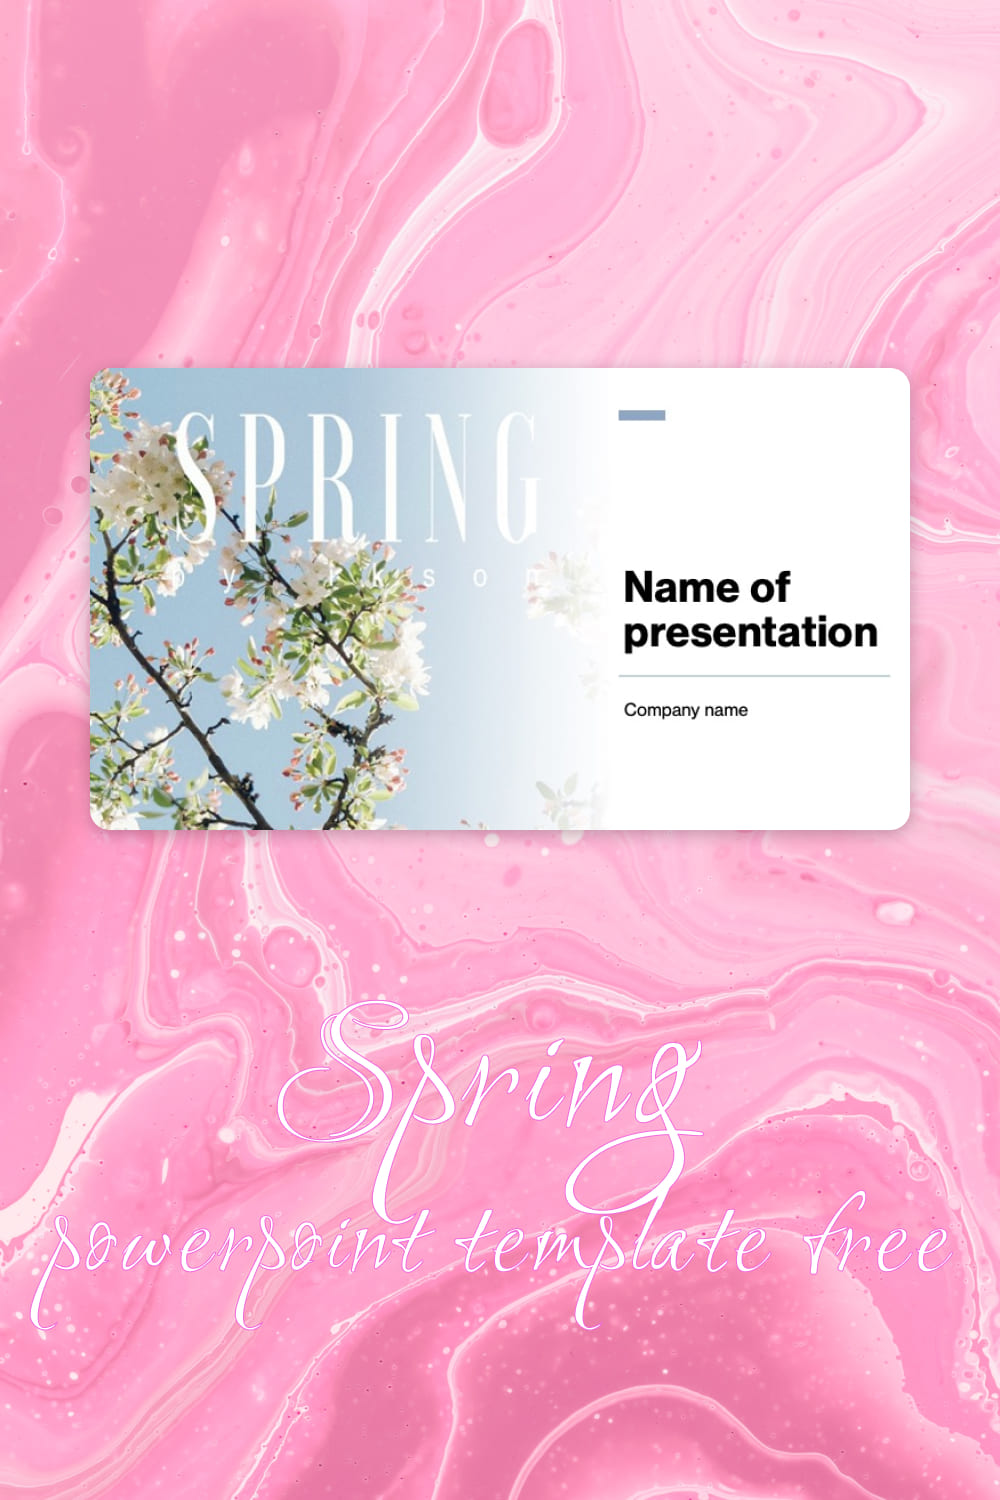 Pinterest Spring Powerpoint Template Free.